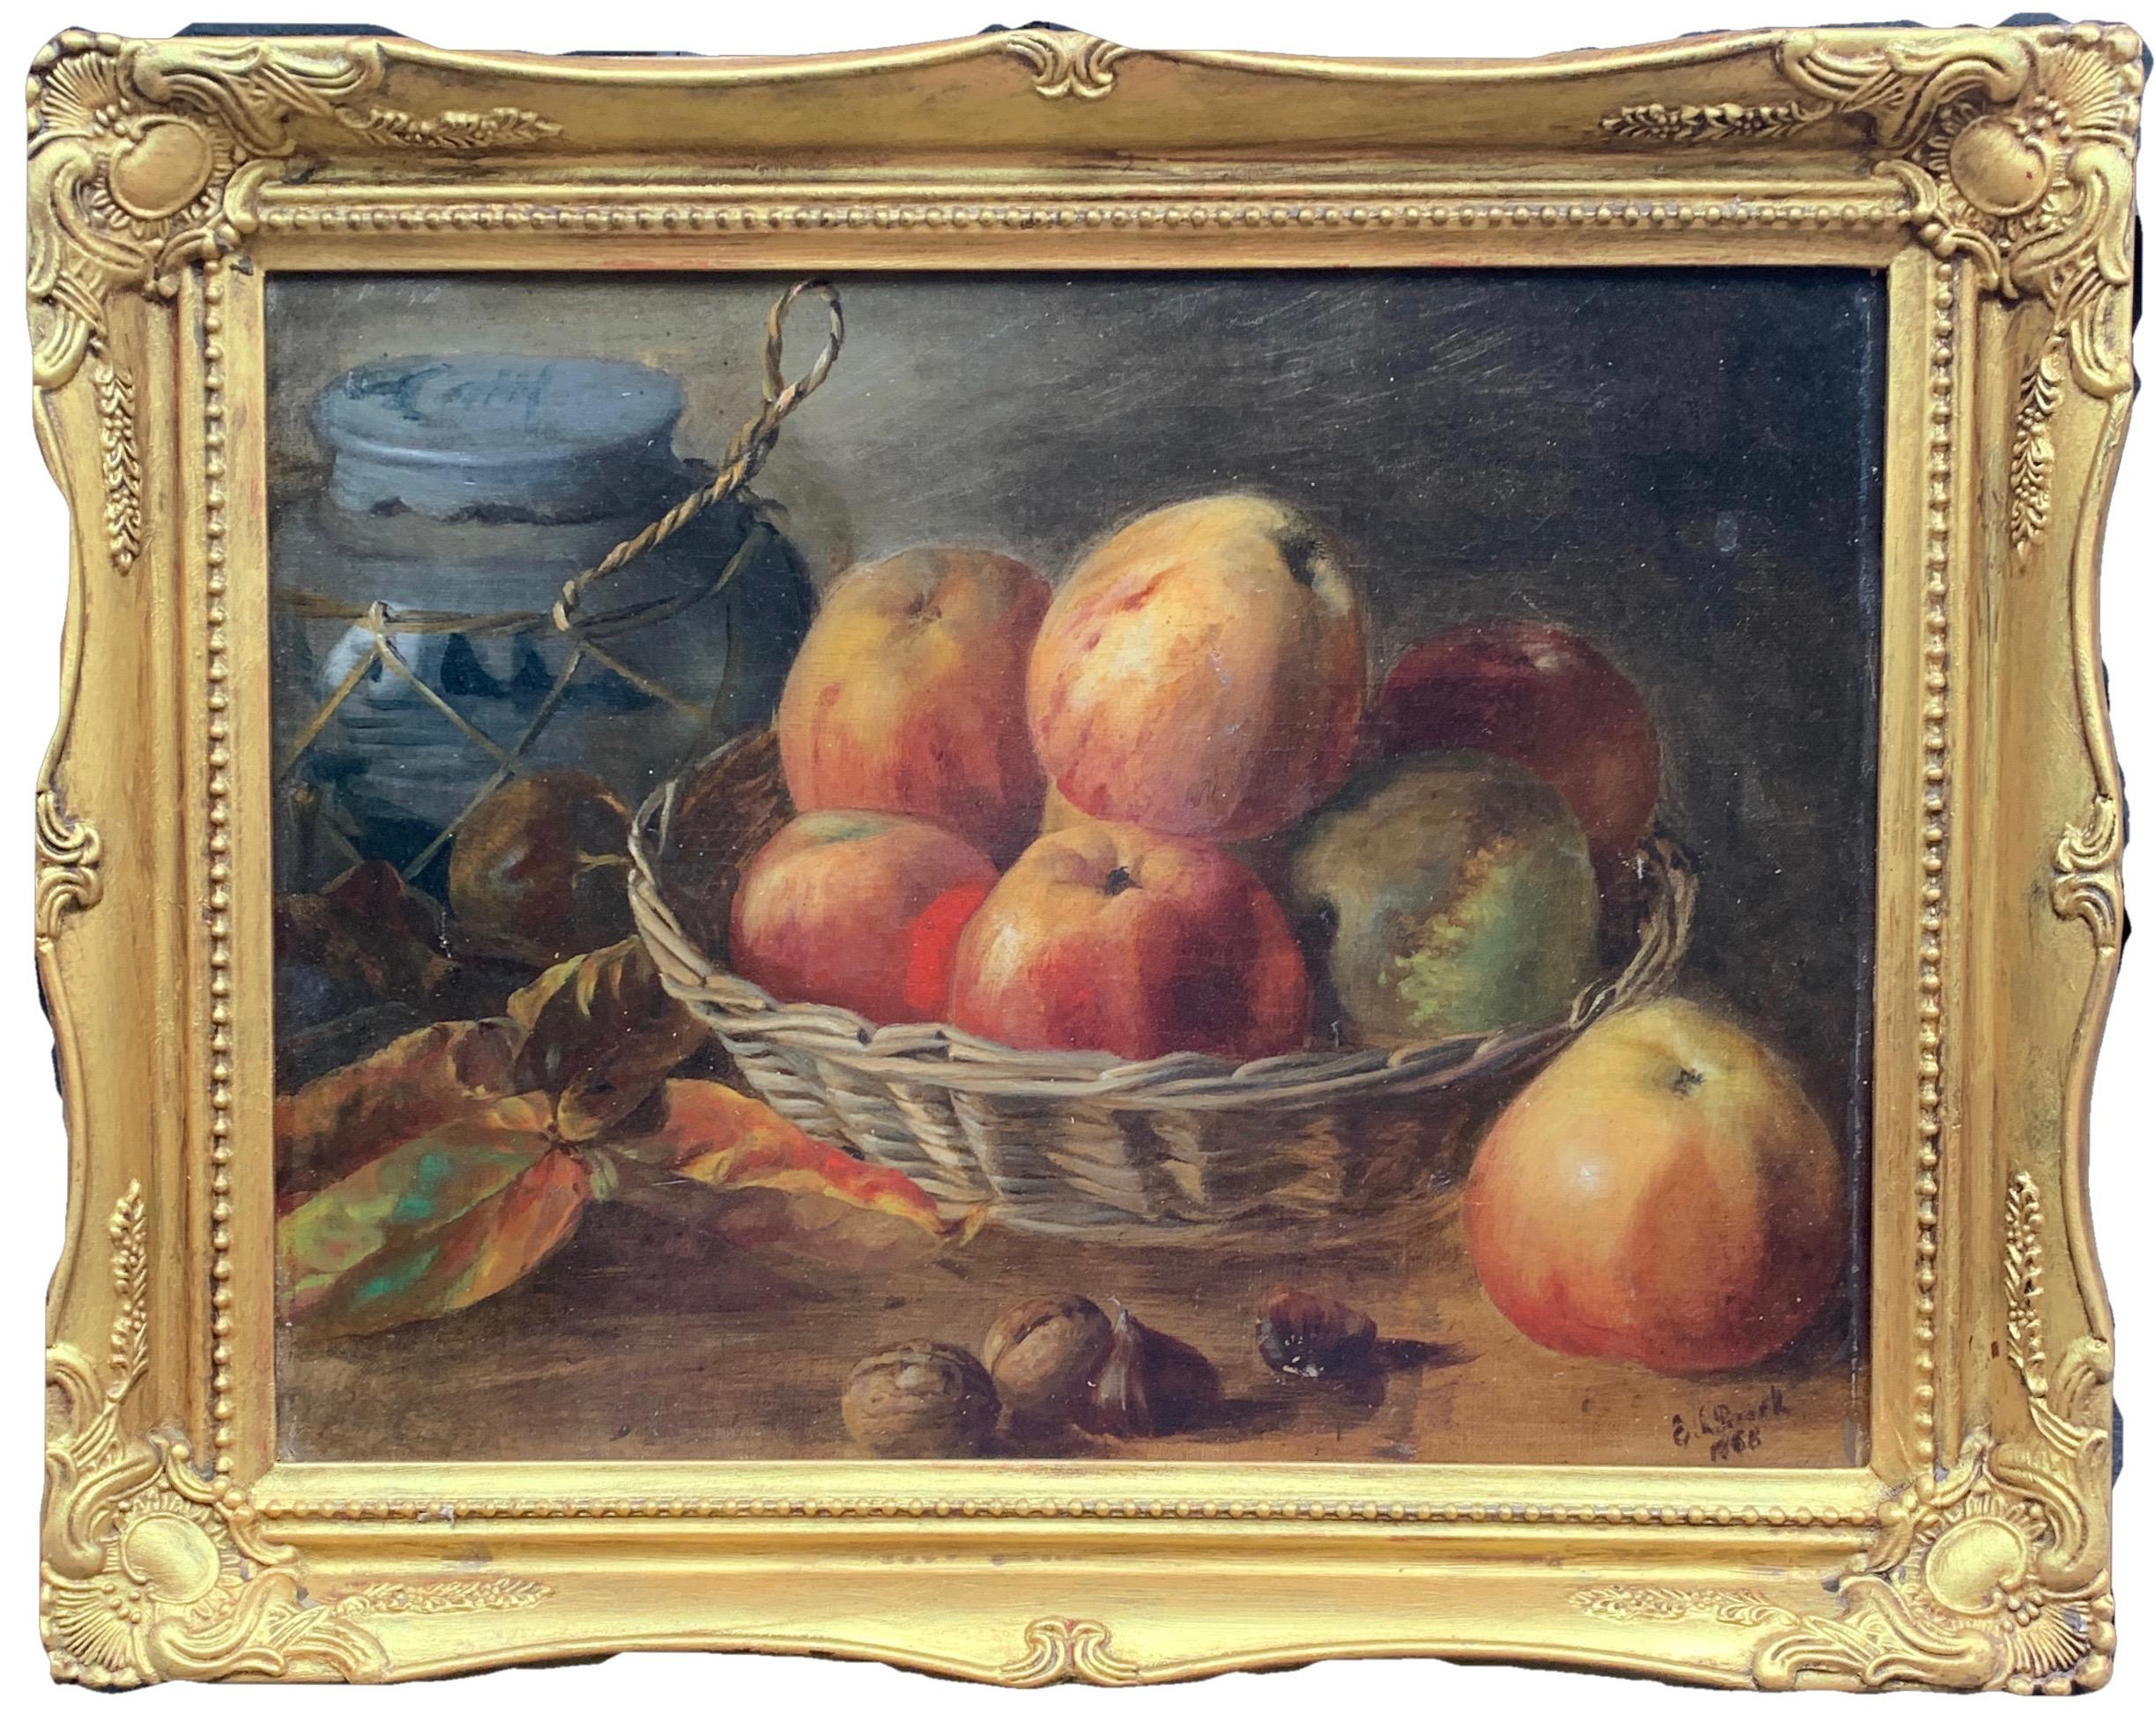 Unknown Still-Life Painting - English Antique Victorian still life of apples, walnuts and a blue and white jar